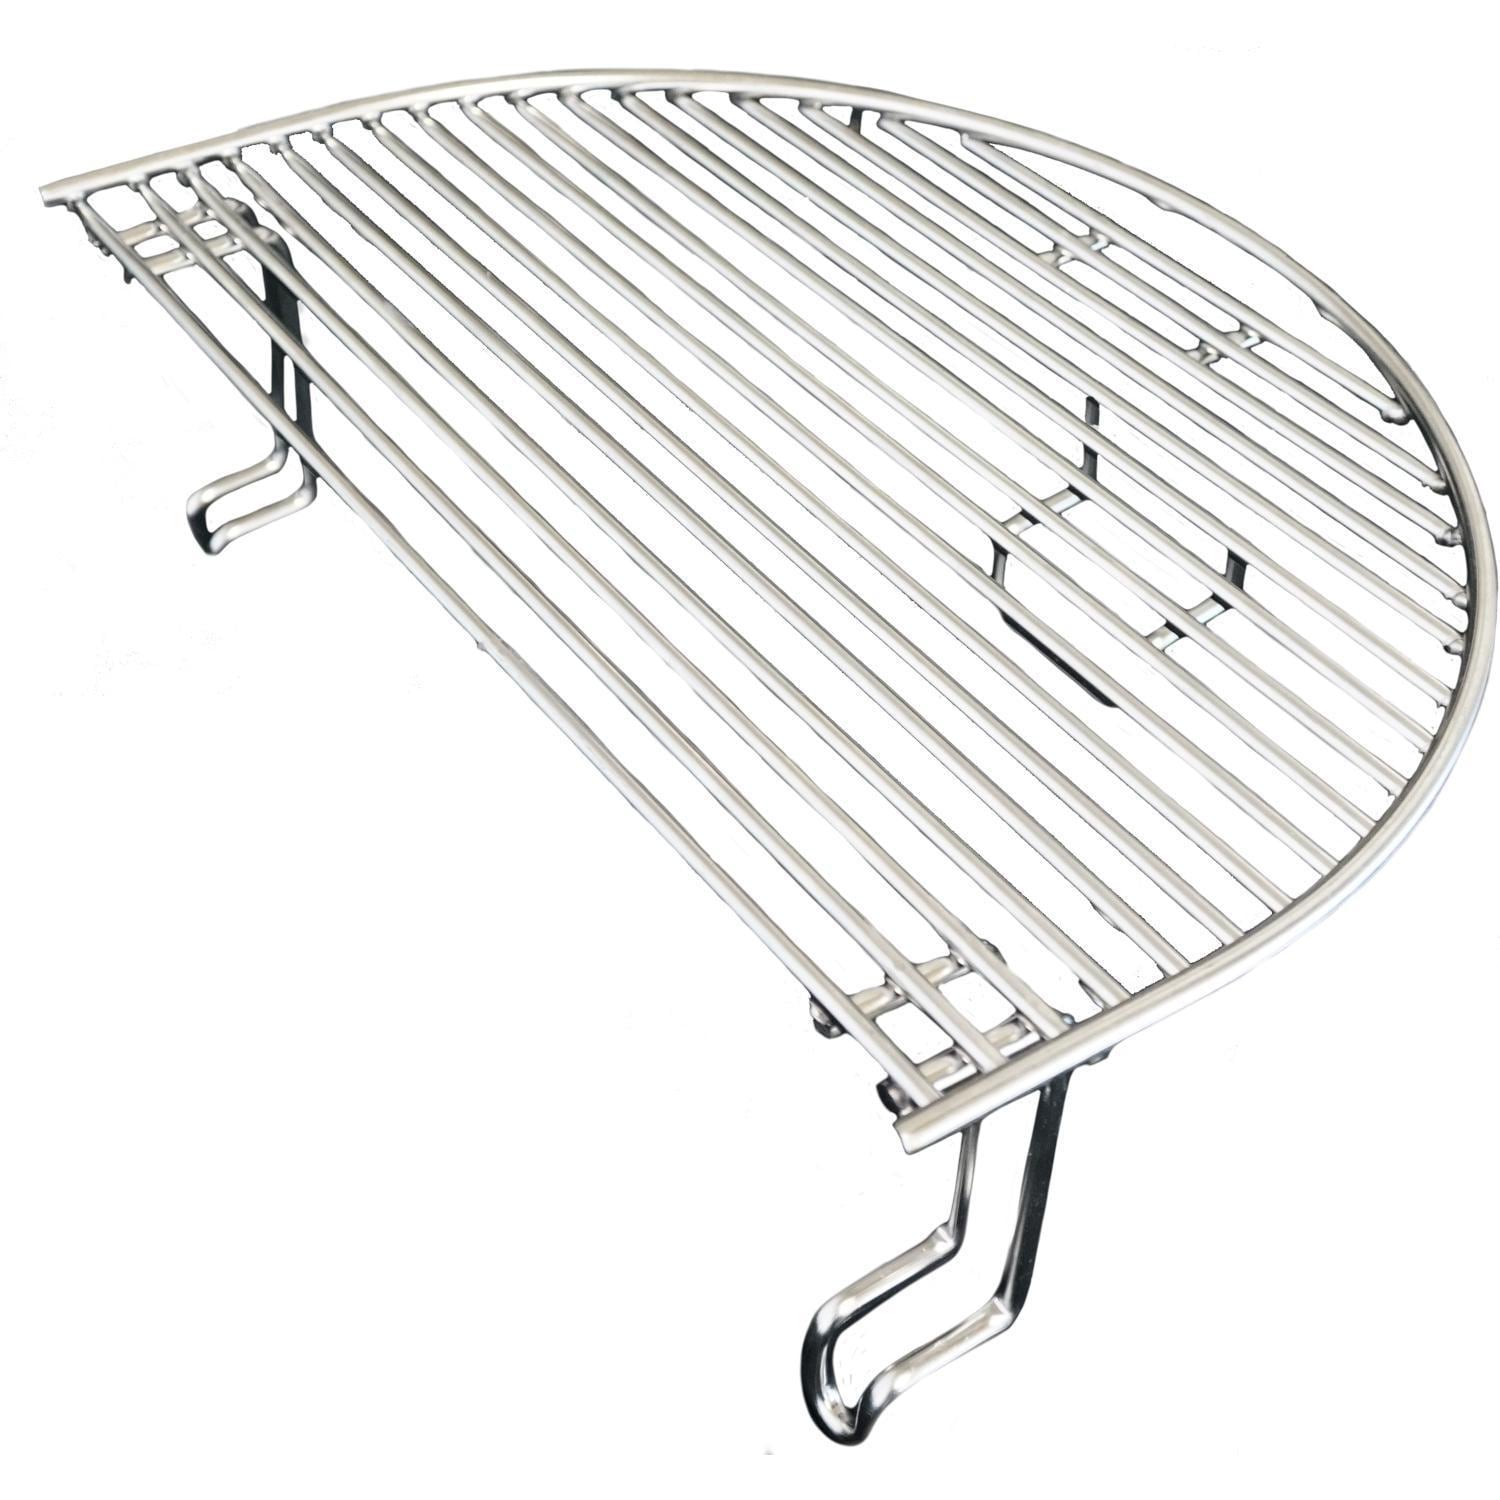 Primo Extended Cooking Rack For Oval Large - PG00315 - image 1 of 3